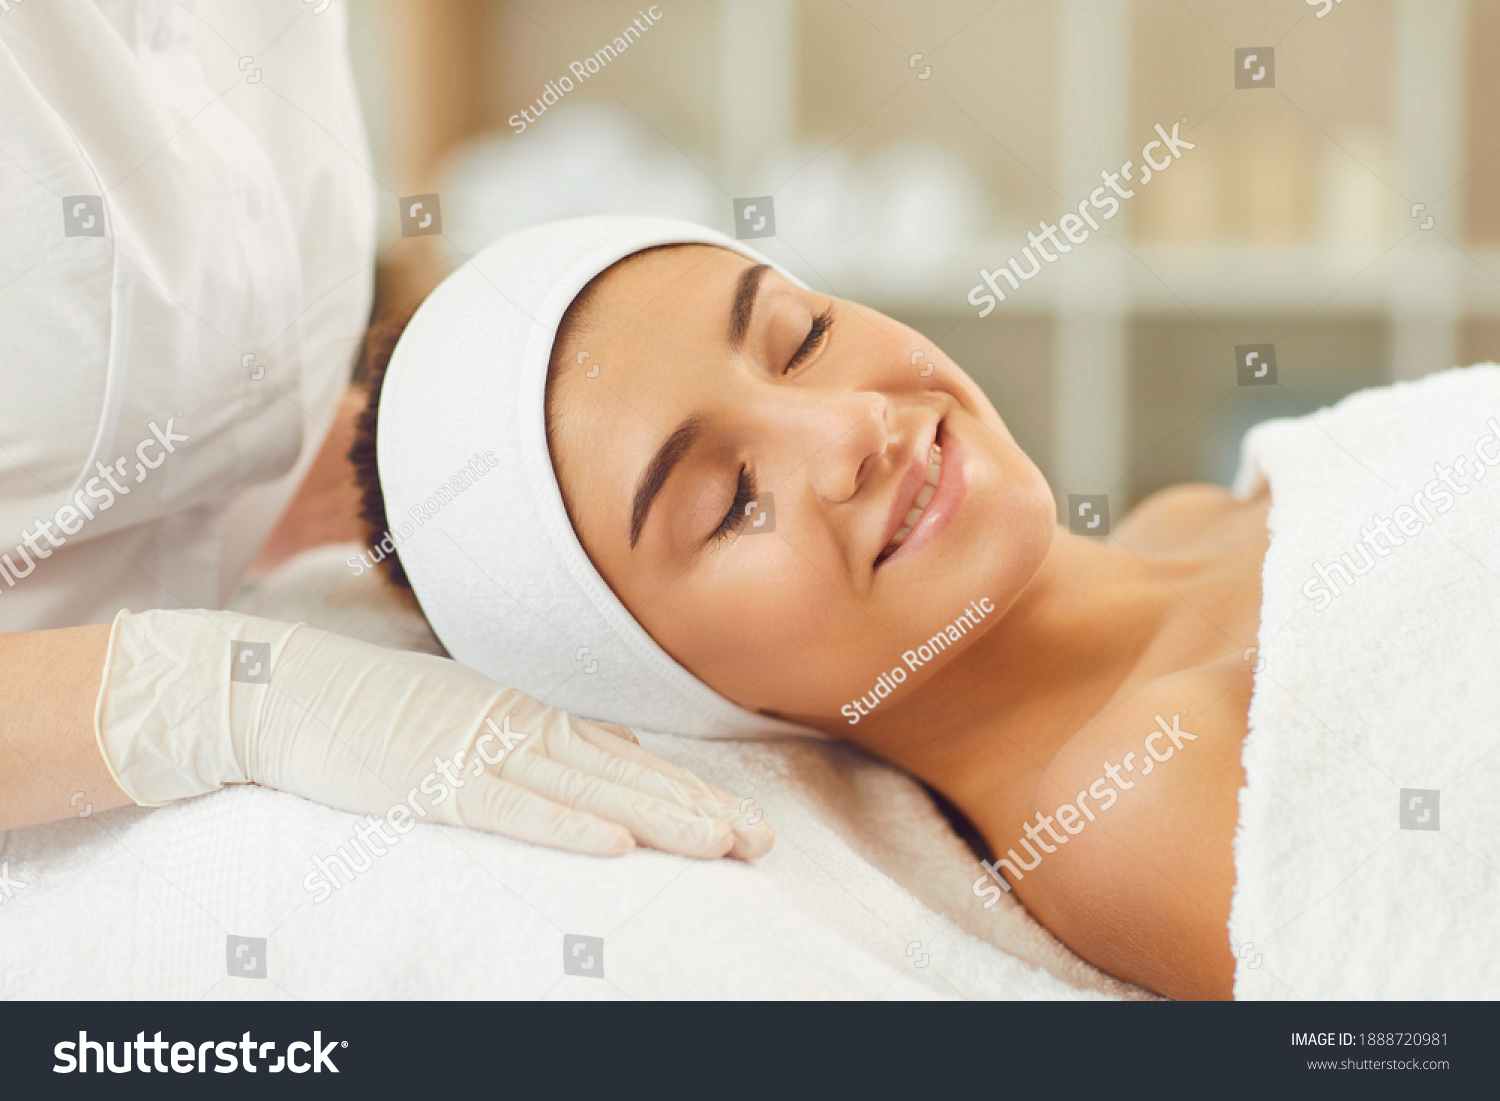 Beautiful young woman receiving skin treatment from a beautician. Smiling young womans face with clsed eyes expressing happiness during skincare procedure in beauty spa salon #1888720981